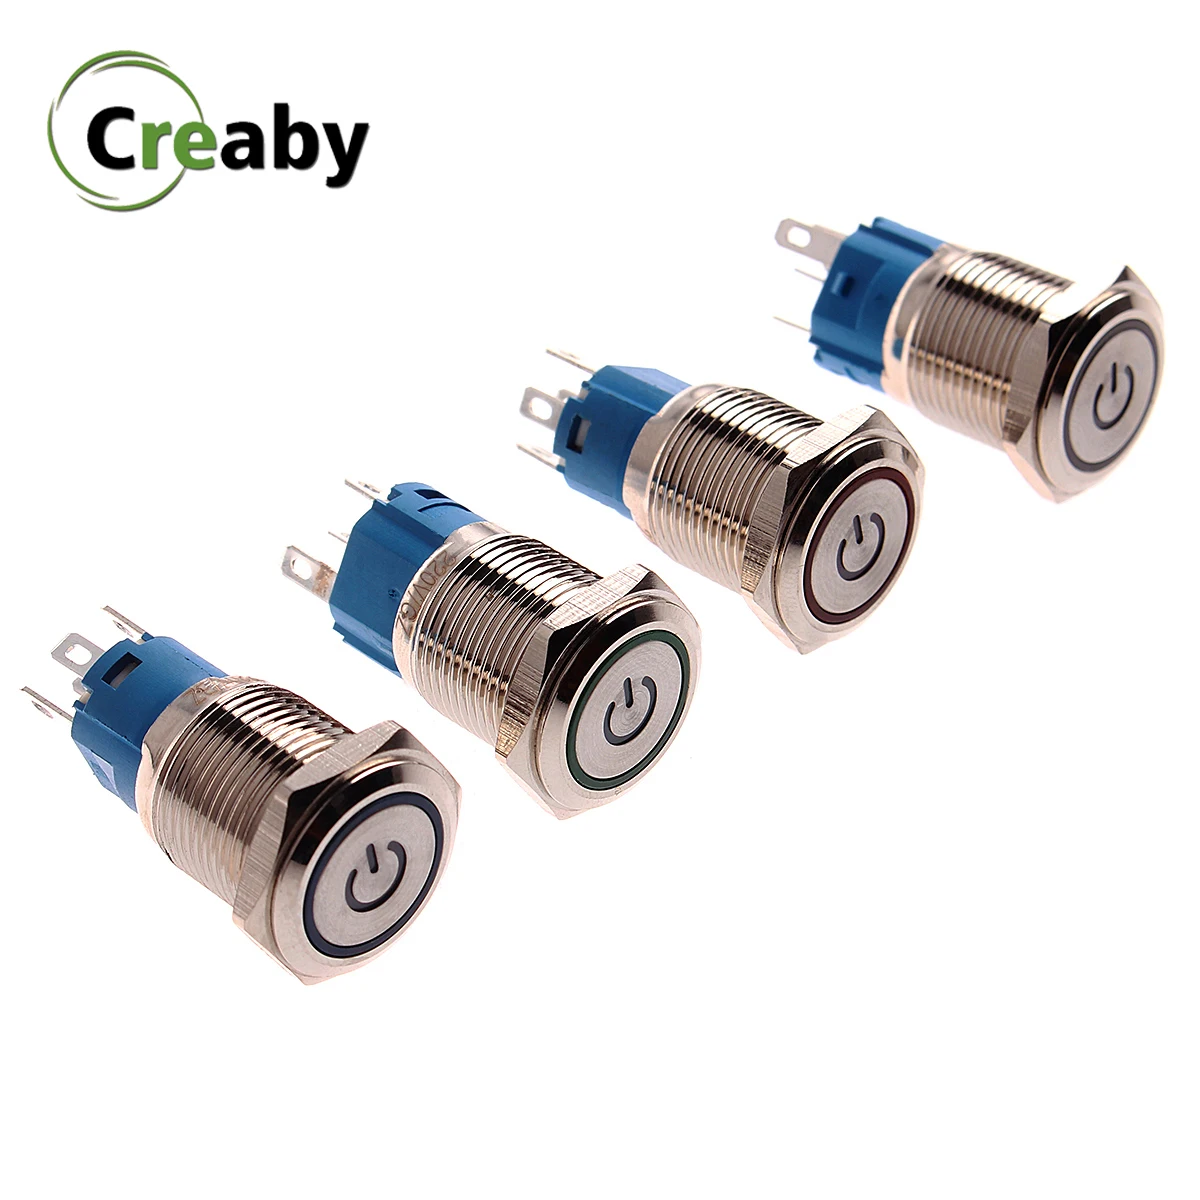 16mm Momentary Latching Metal Push Button Switch 5V 12V NO/NC ON-OFF 5 Pin Self Reset/Locking Fixed Switches With LED Light